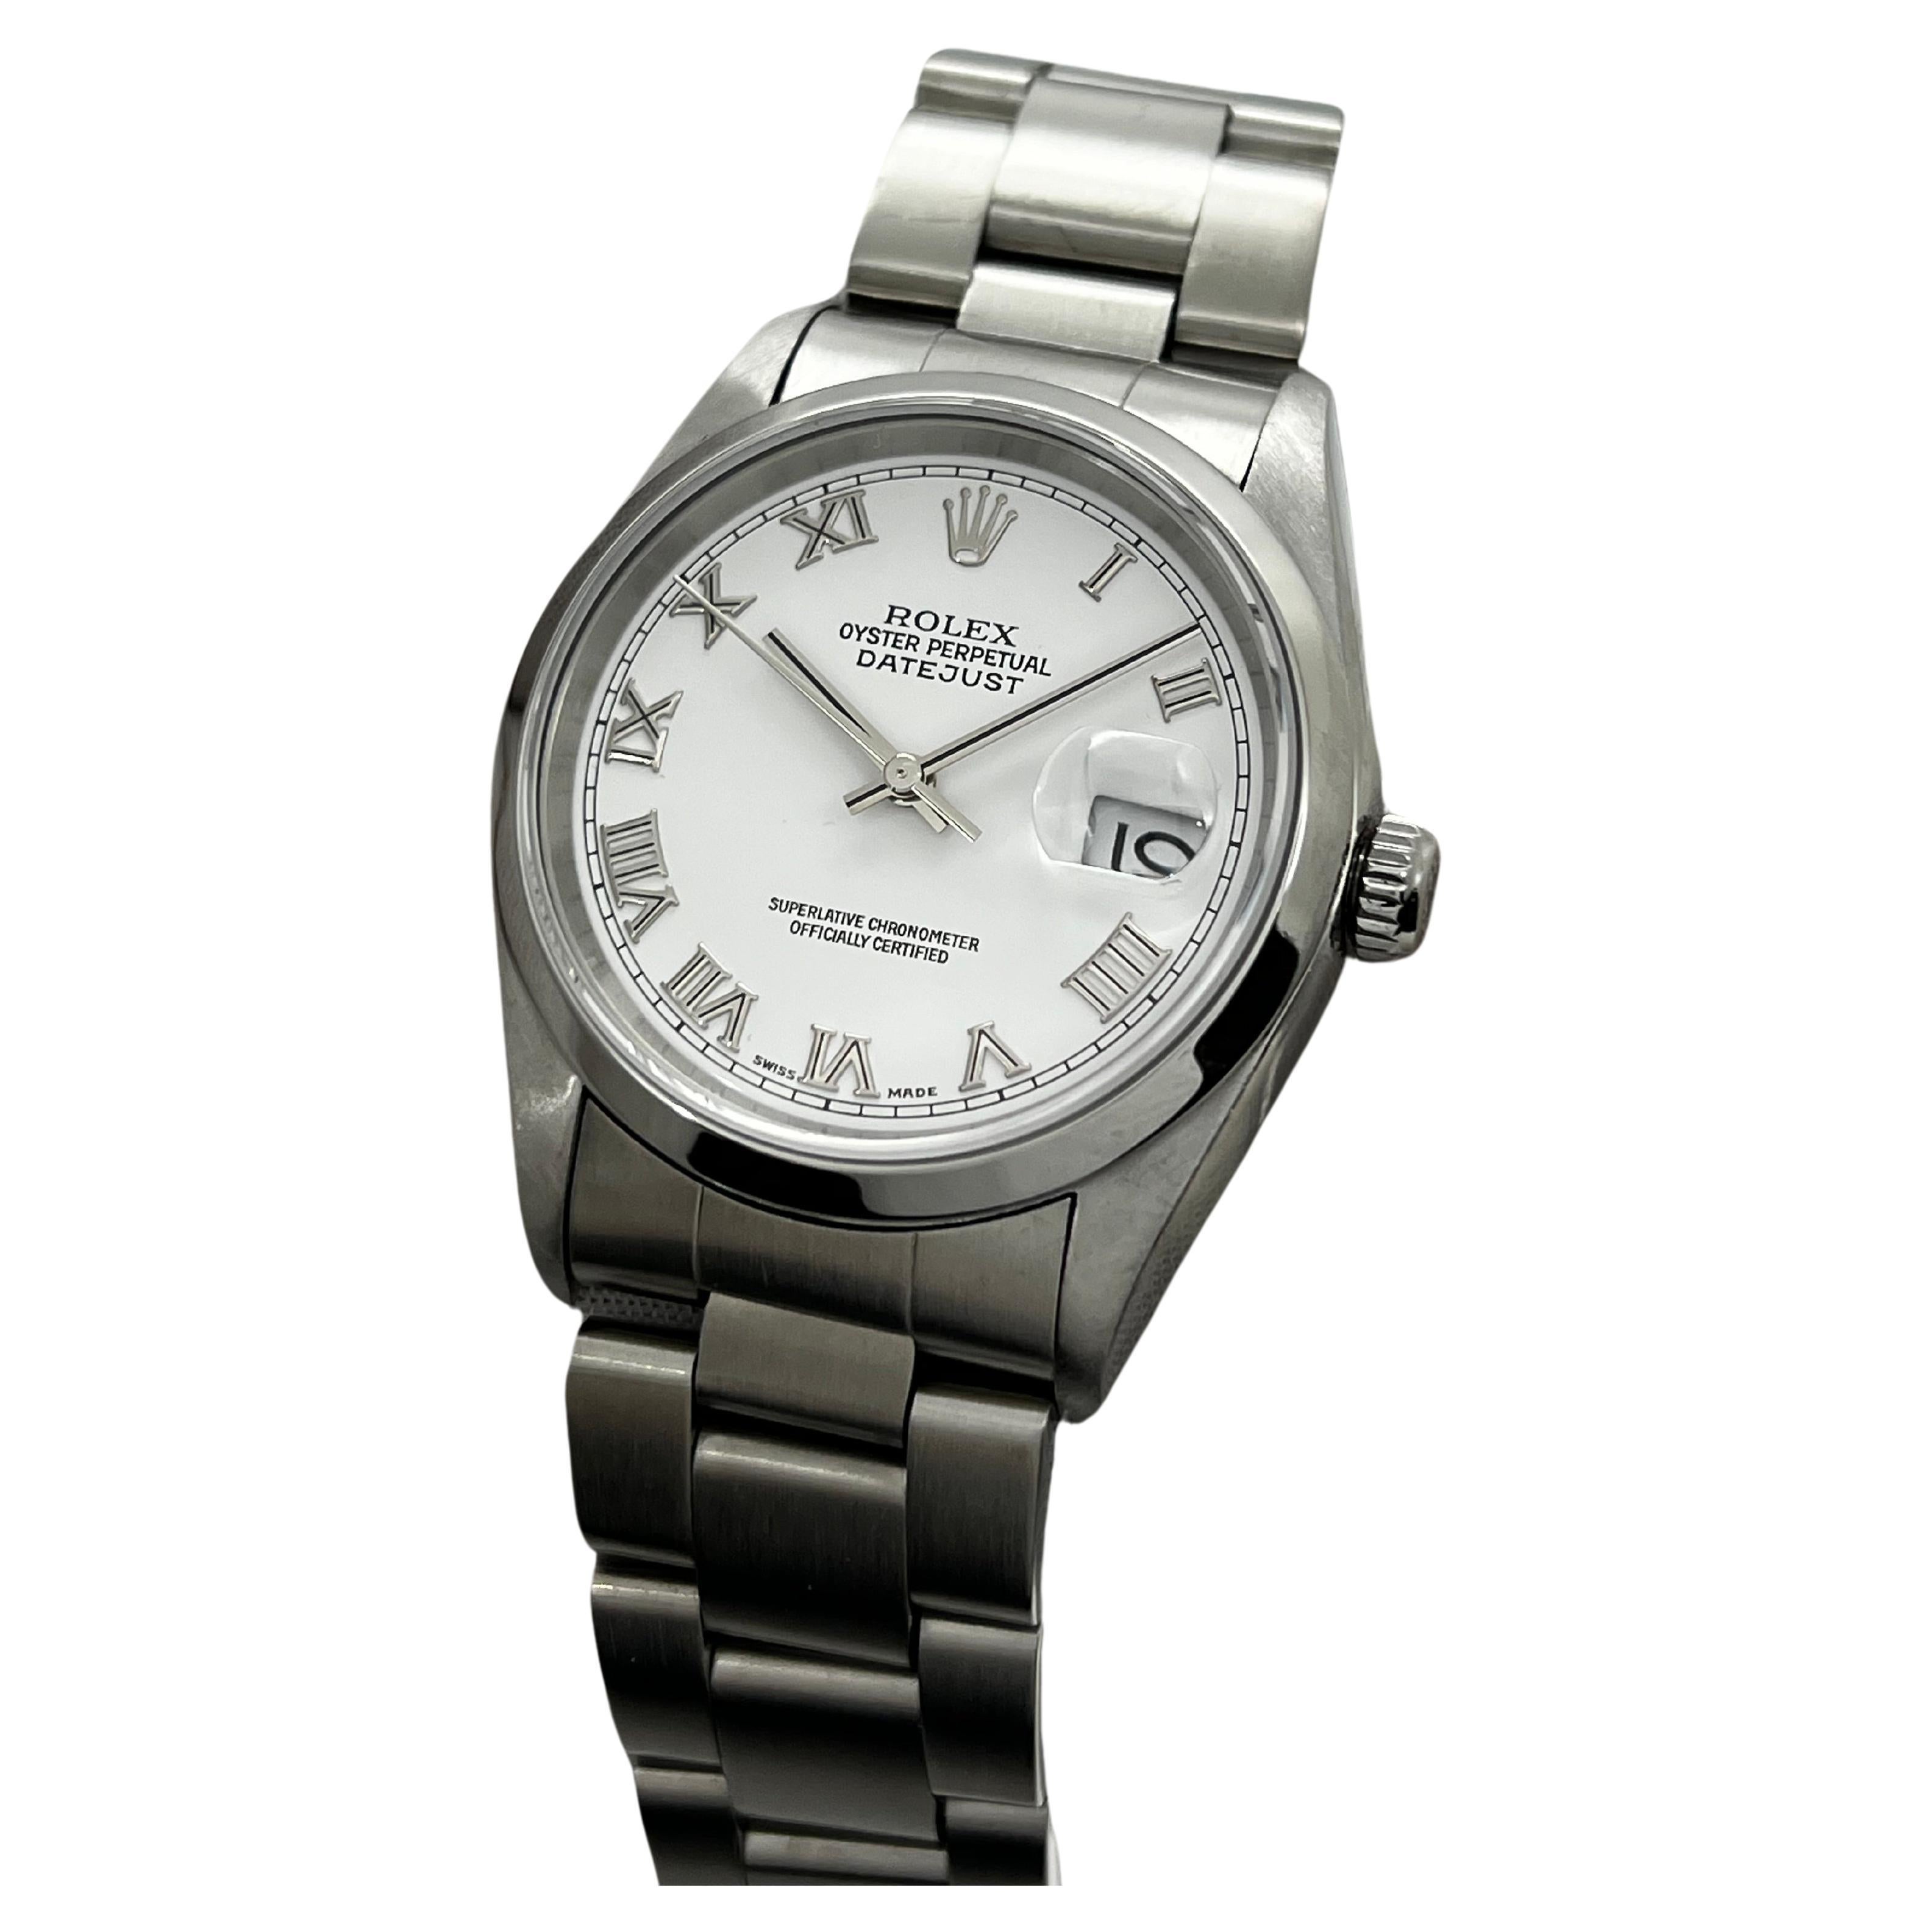 Rolex Datejust 16200 White Roman Dial Stainless Steel Box Paper